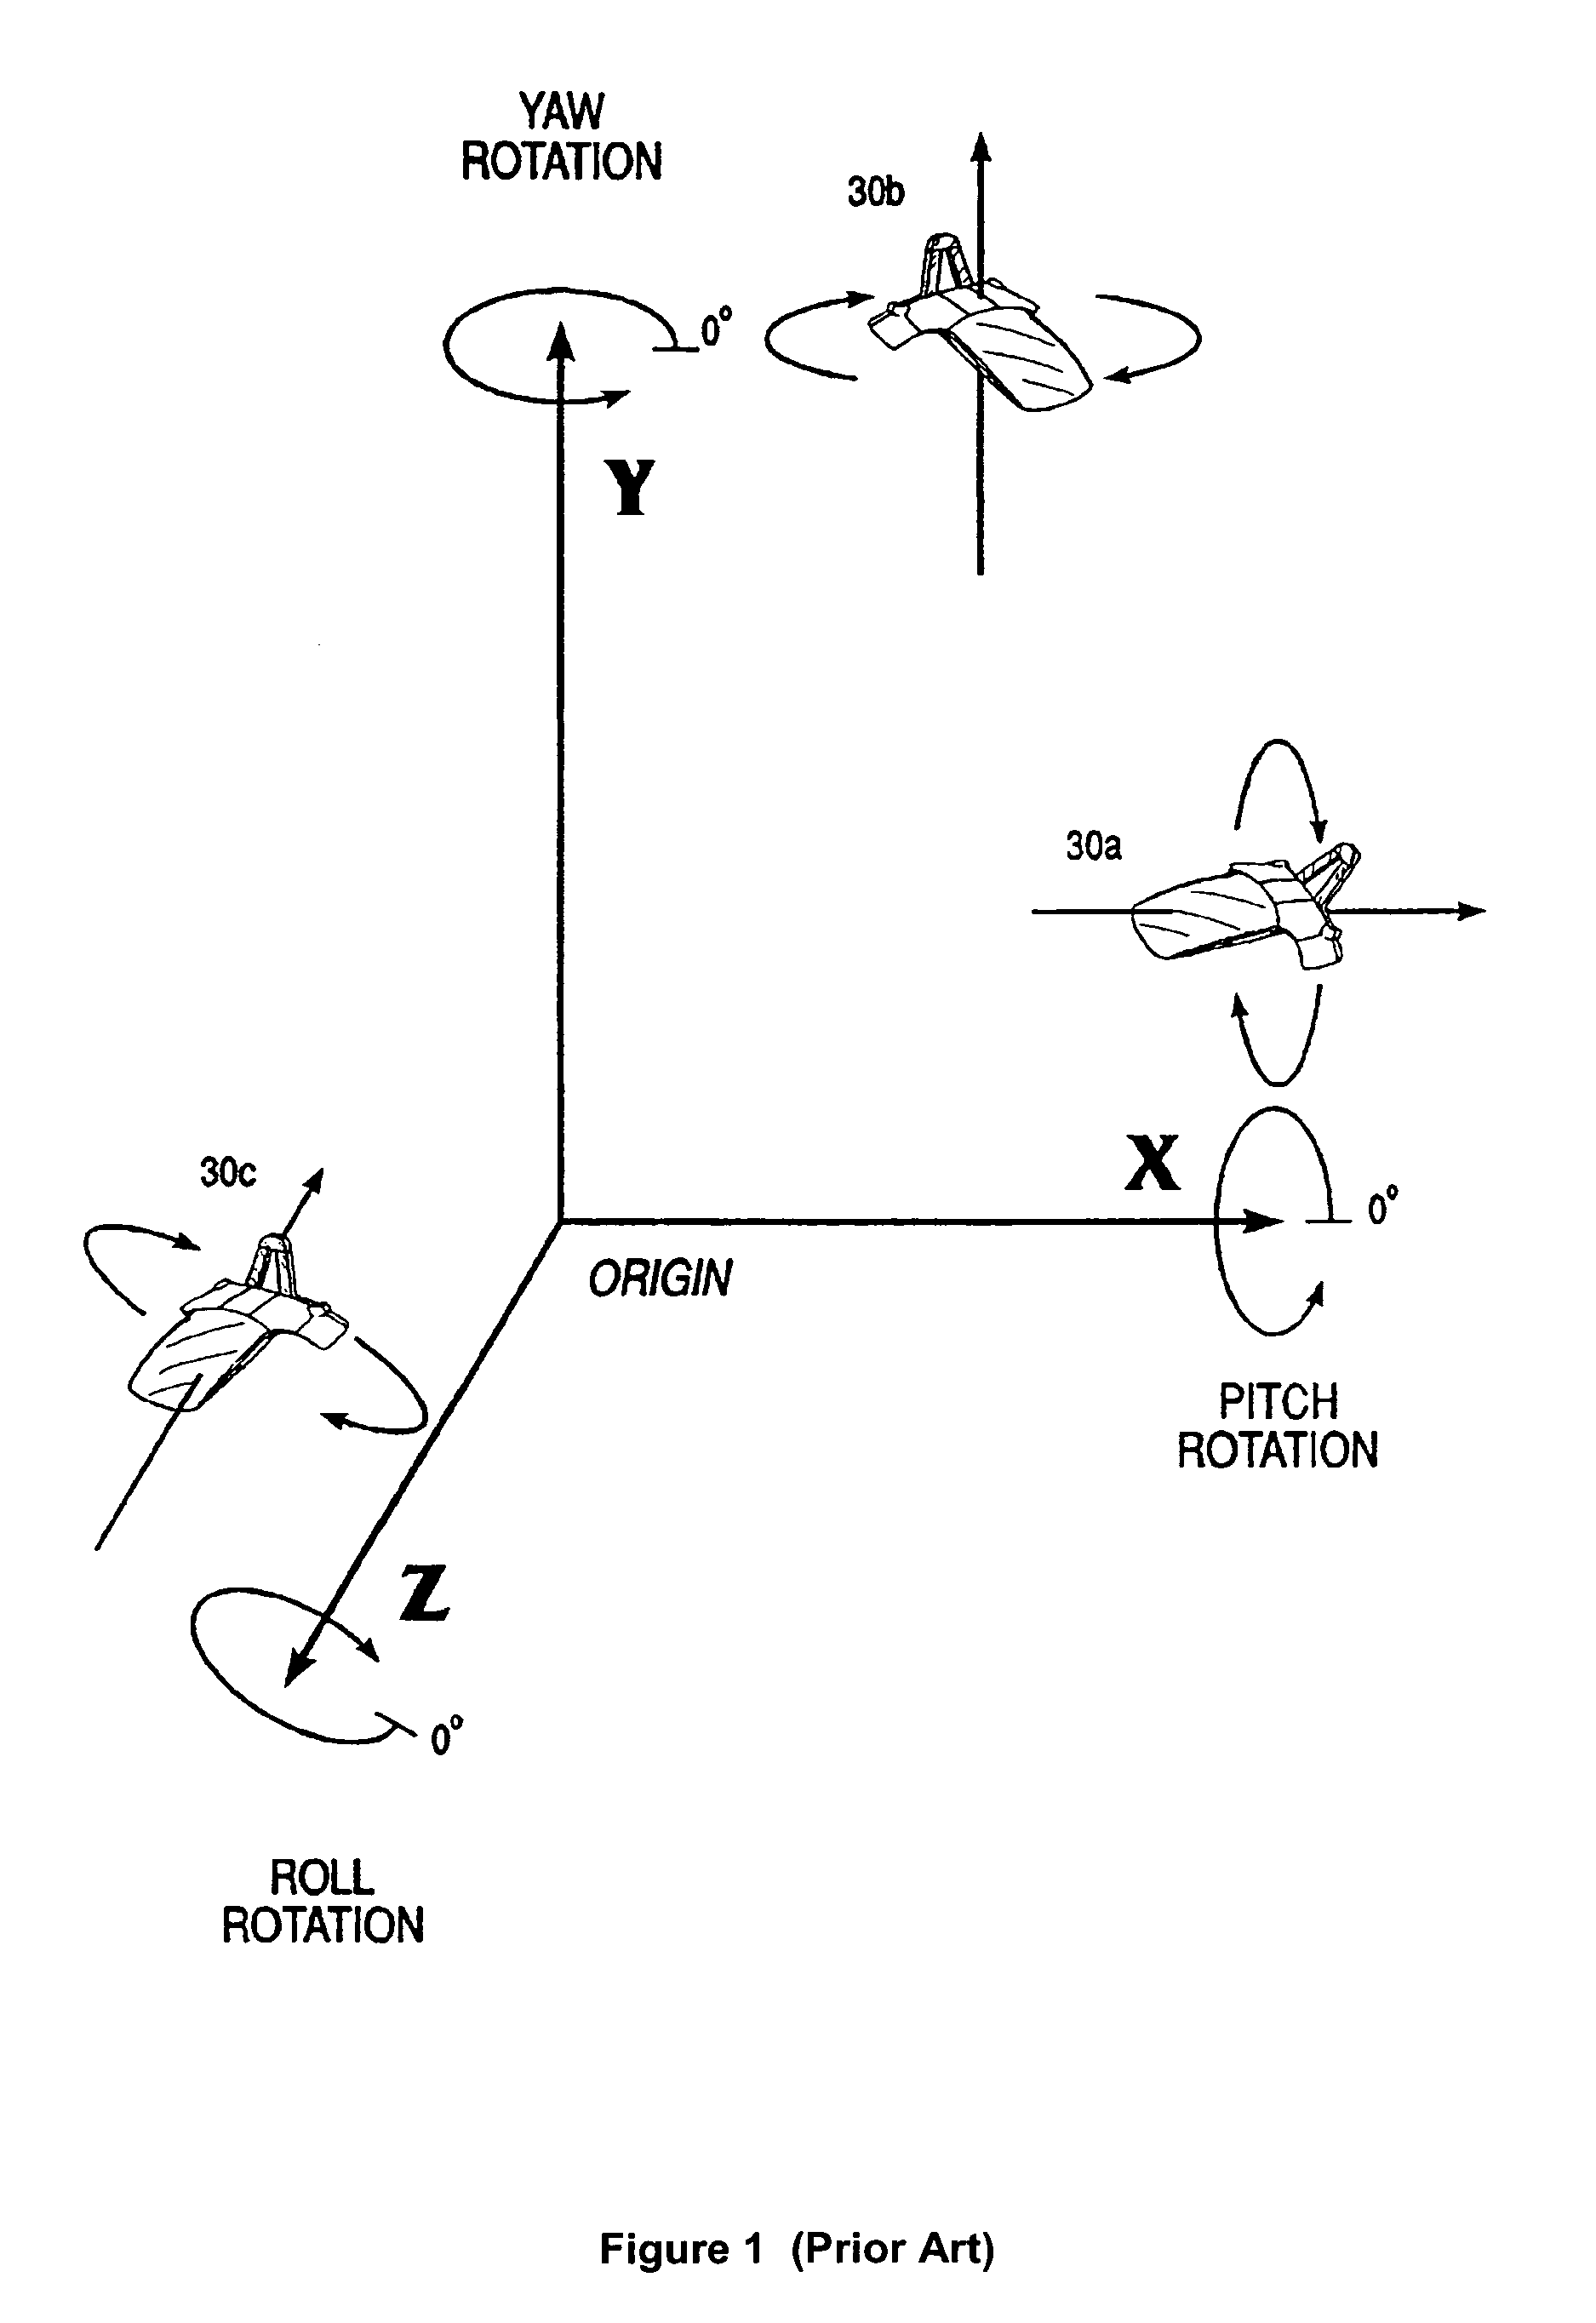 Pointing device for use in air with improved cursor control and battery life